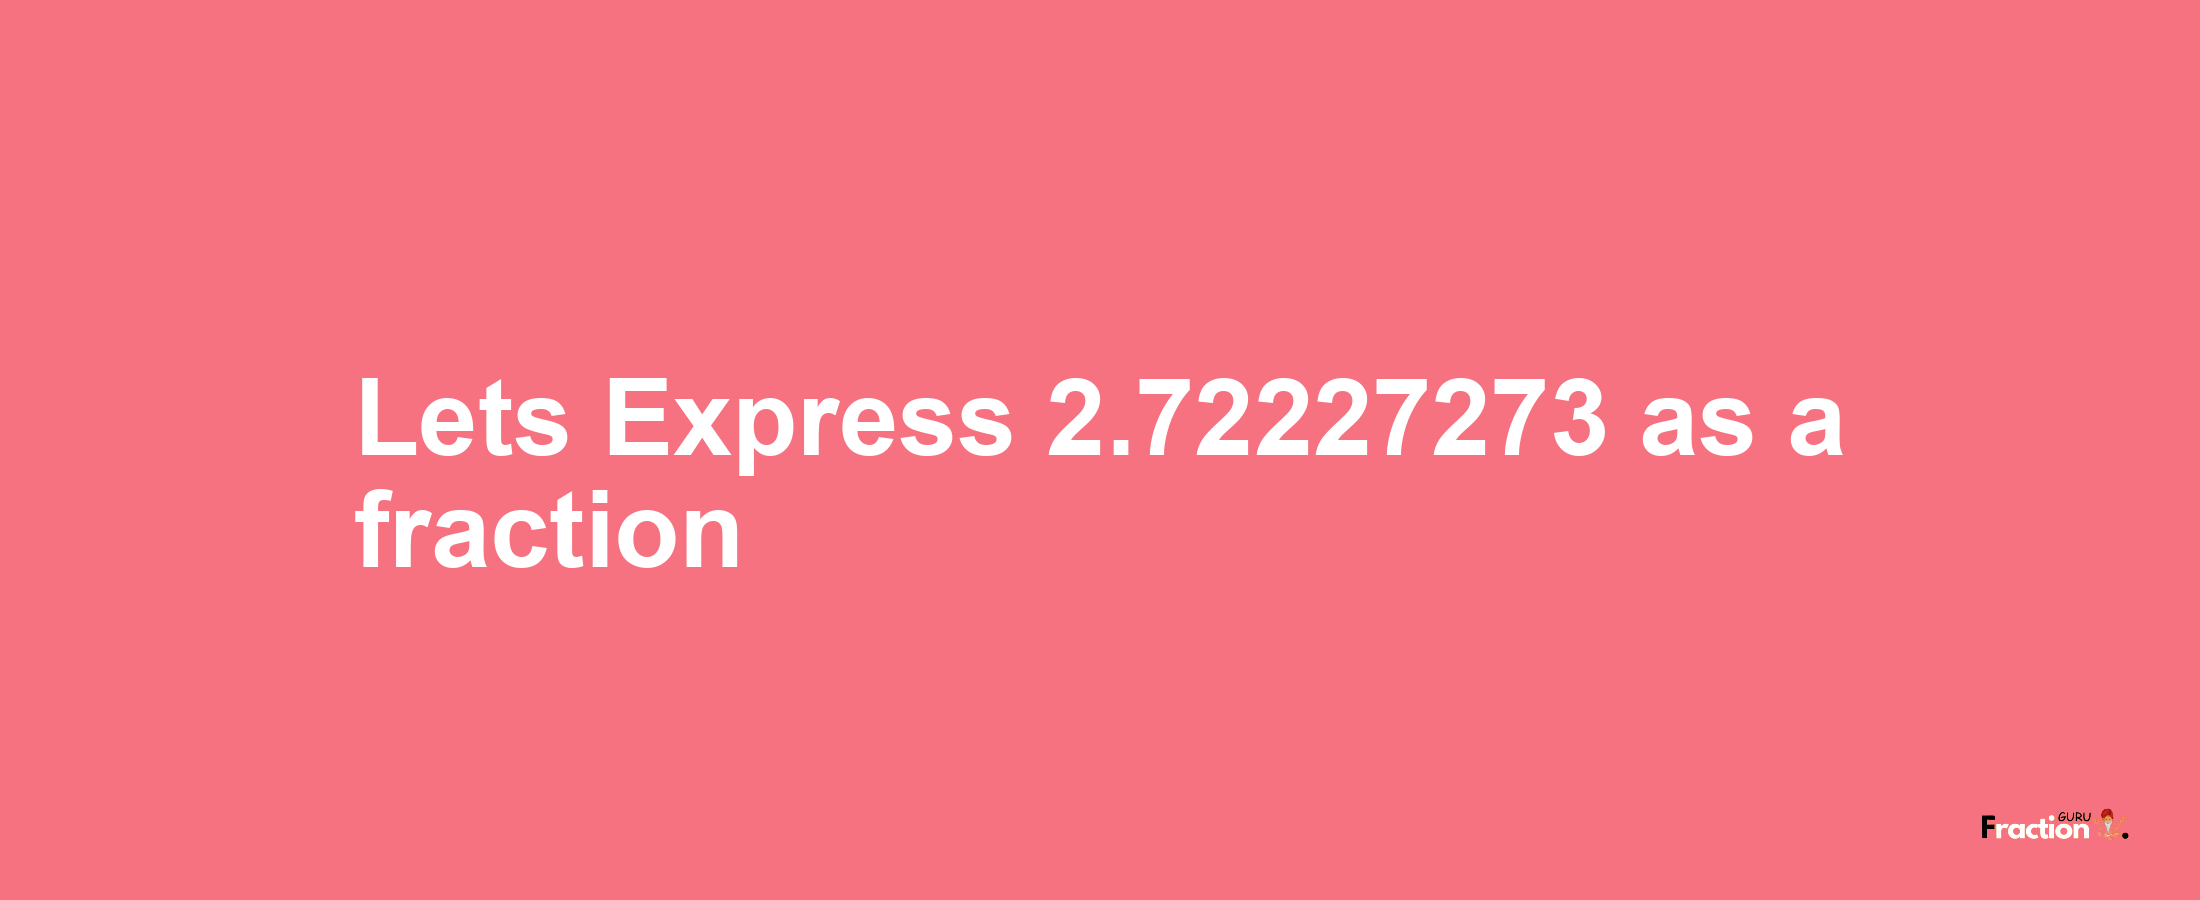 Lets Express 2.72227273 as afraction